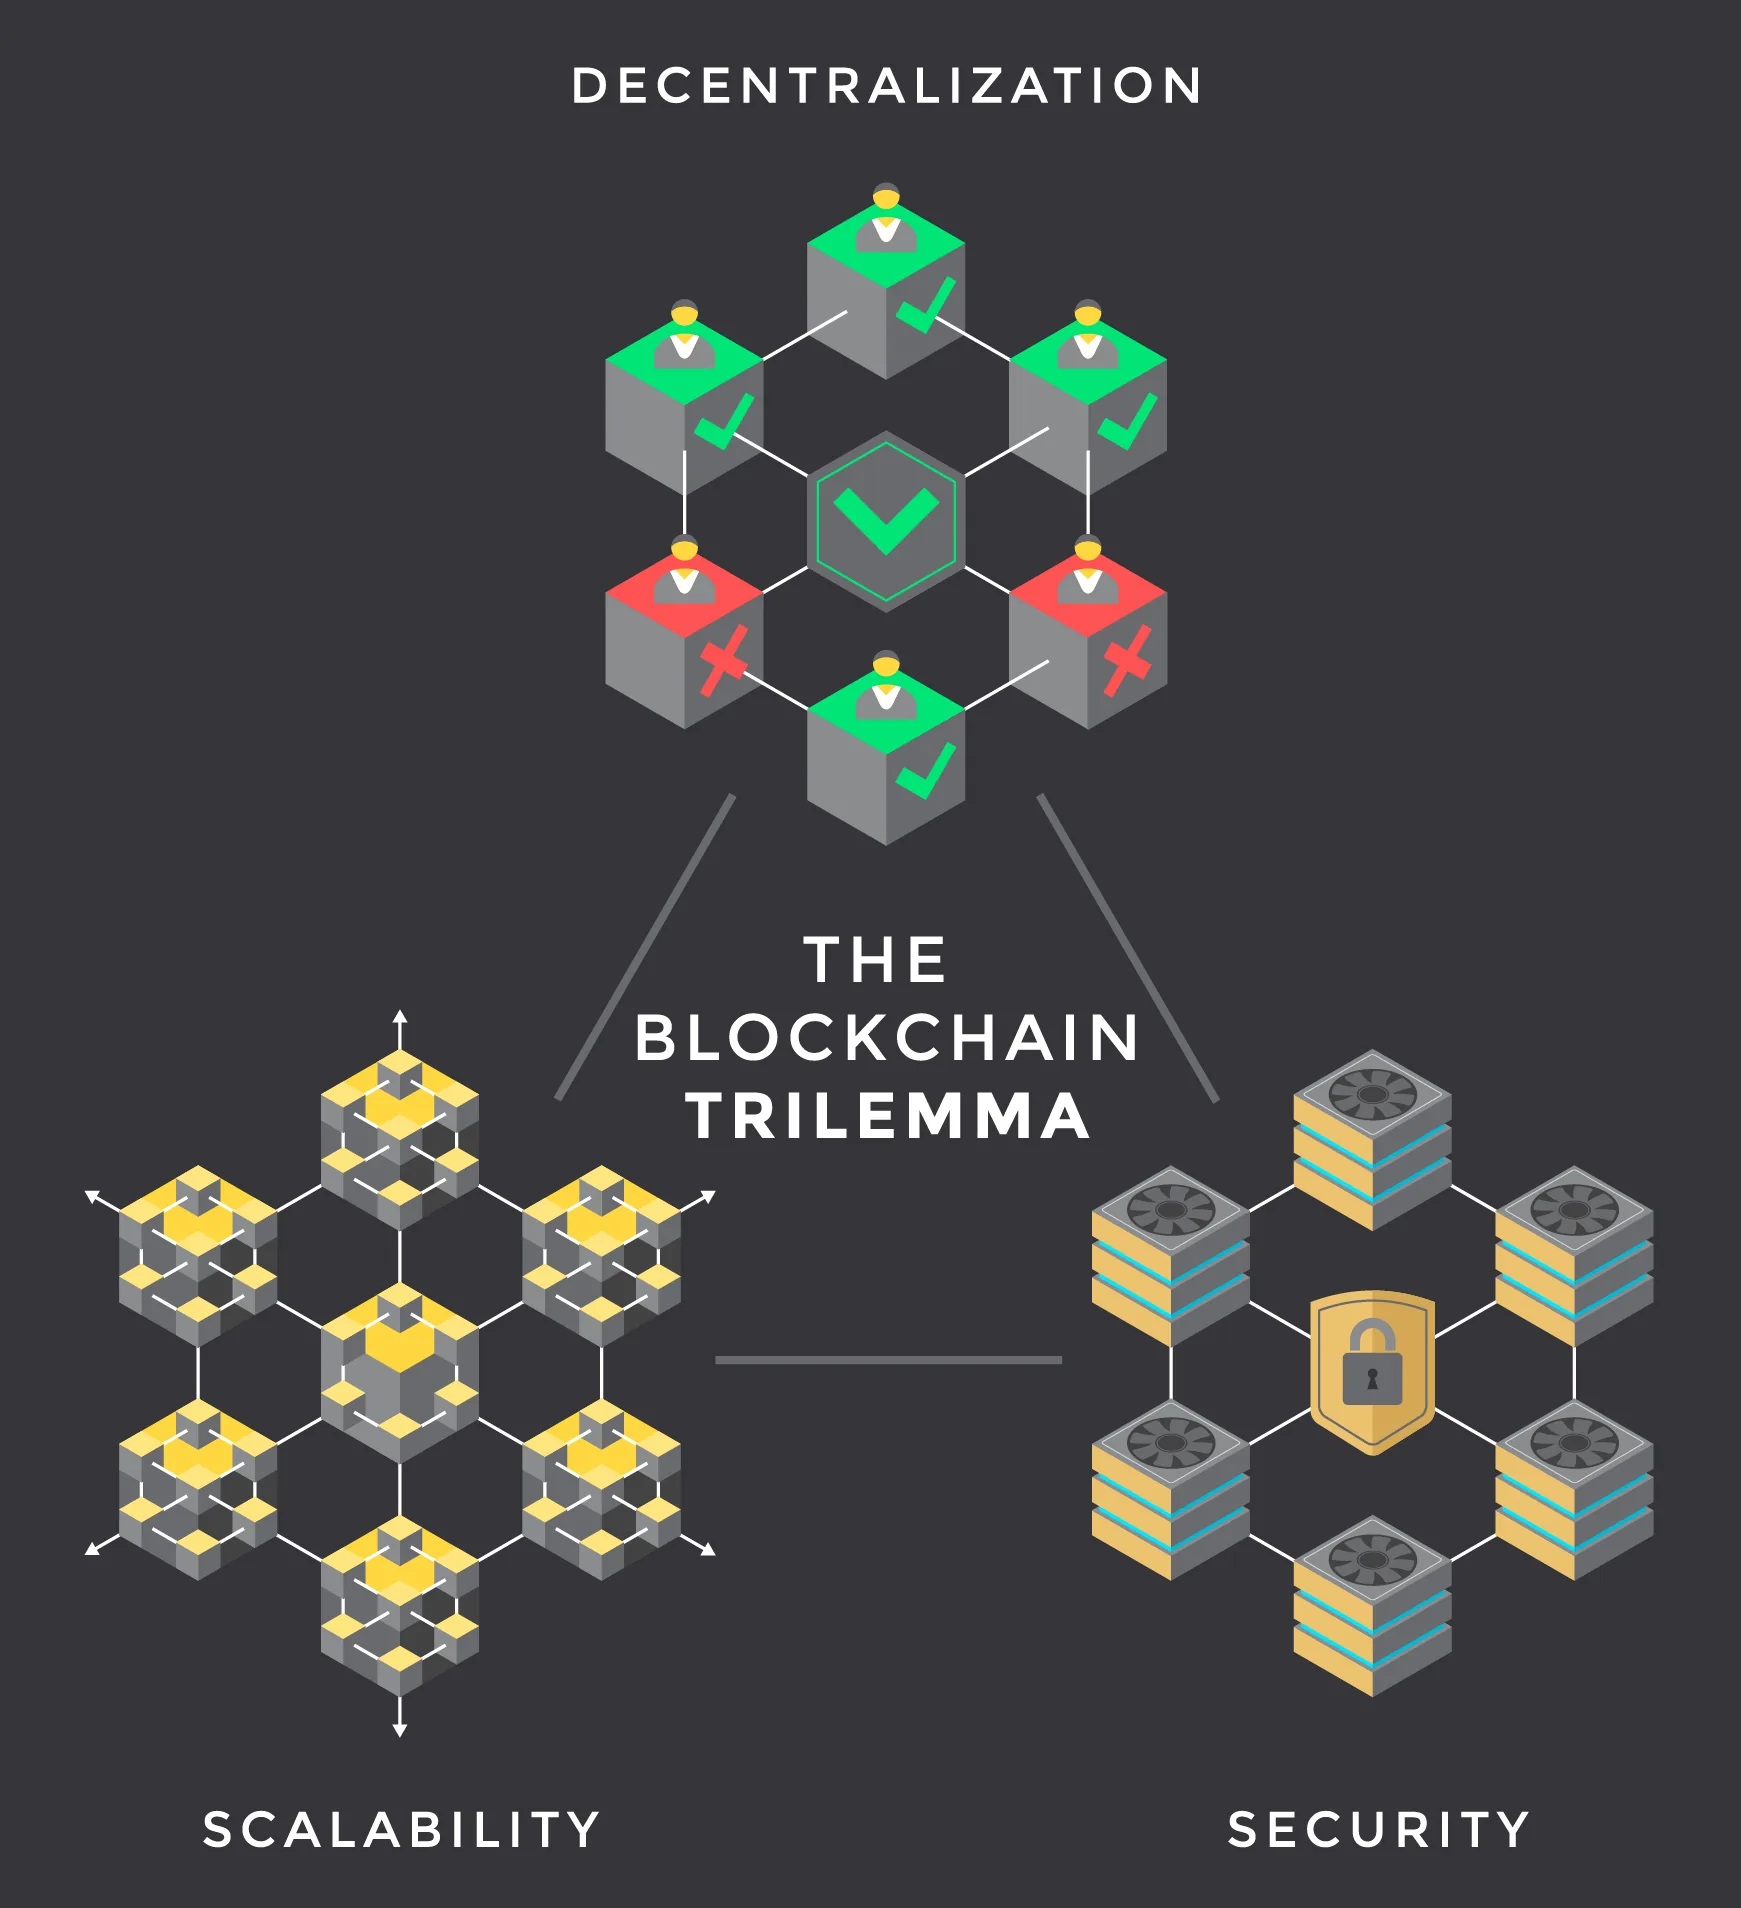 Abstract illustrations of the three elements of the blockchain trilemma: 'Decentralisation', 'Security' and 'Scalability'